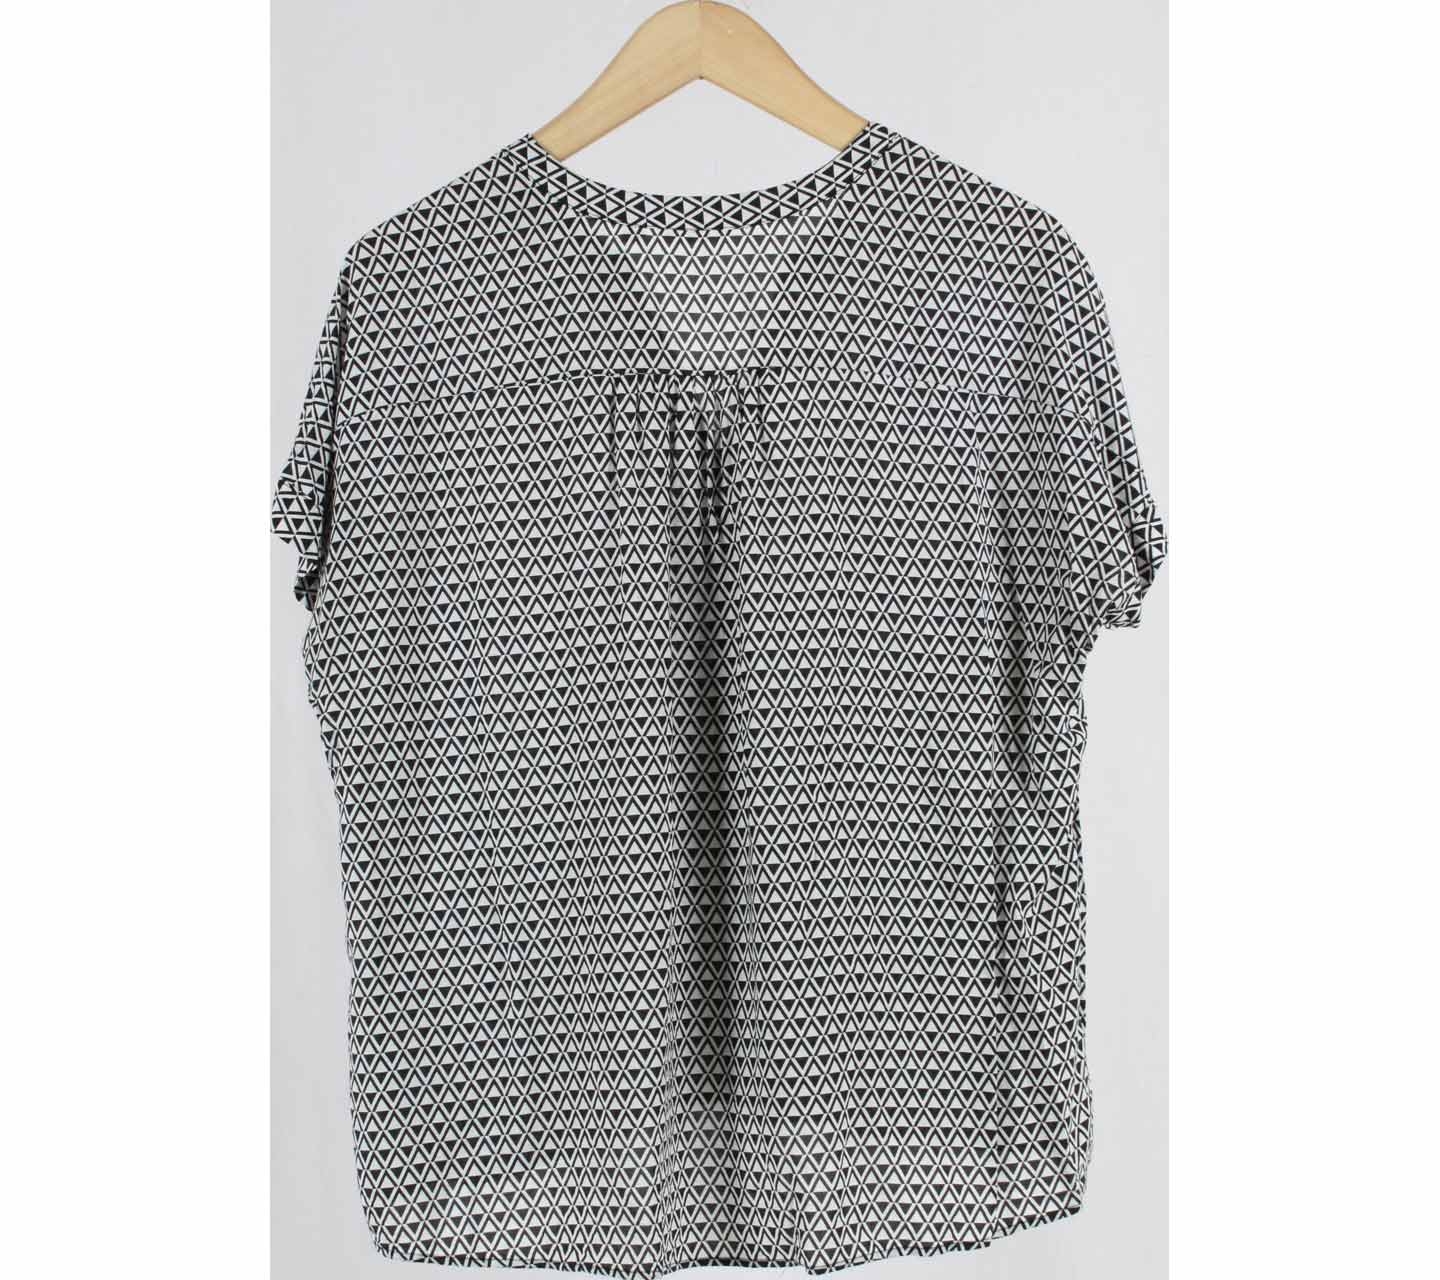 UNIQLO Black And White Patterned Blouse